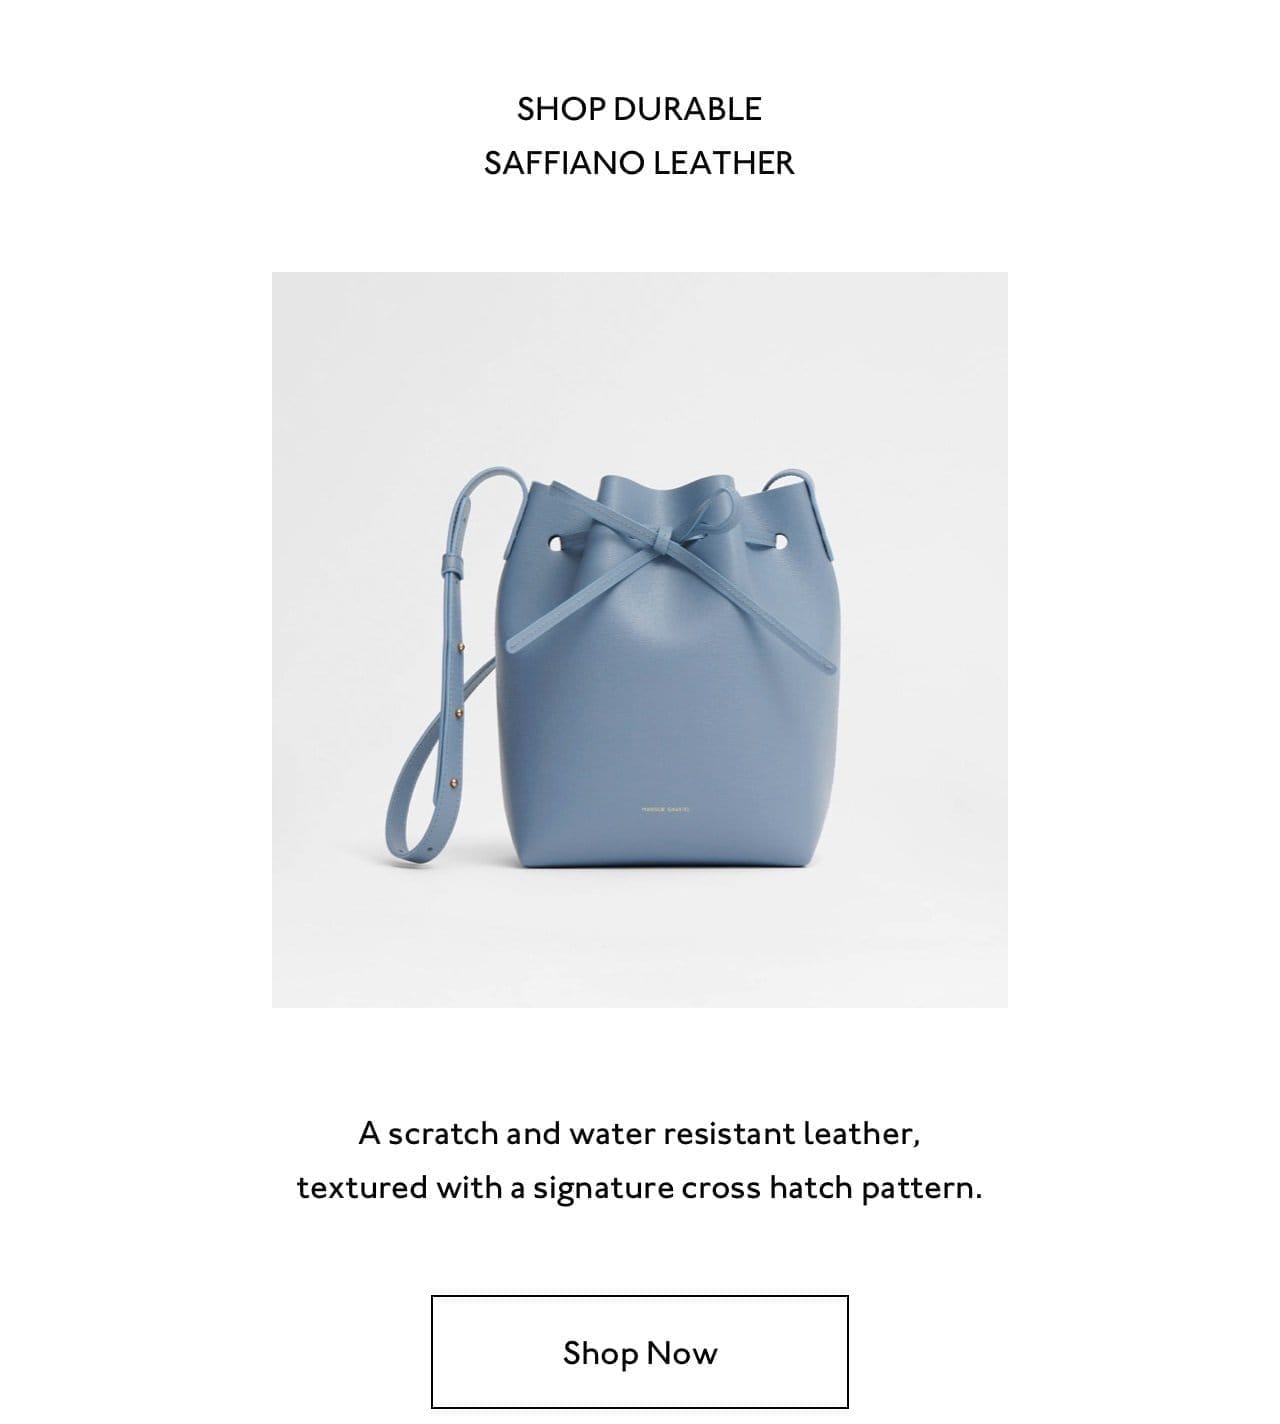 Shop our iconic Bucket Bag in all new colors and fabrications: Durable Saffiano Leather, a scratch and water resistant leather, textured with a signature cross hatch pattern.